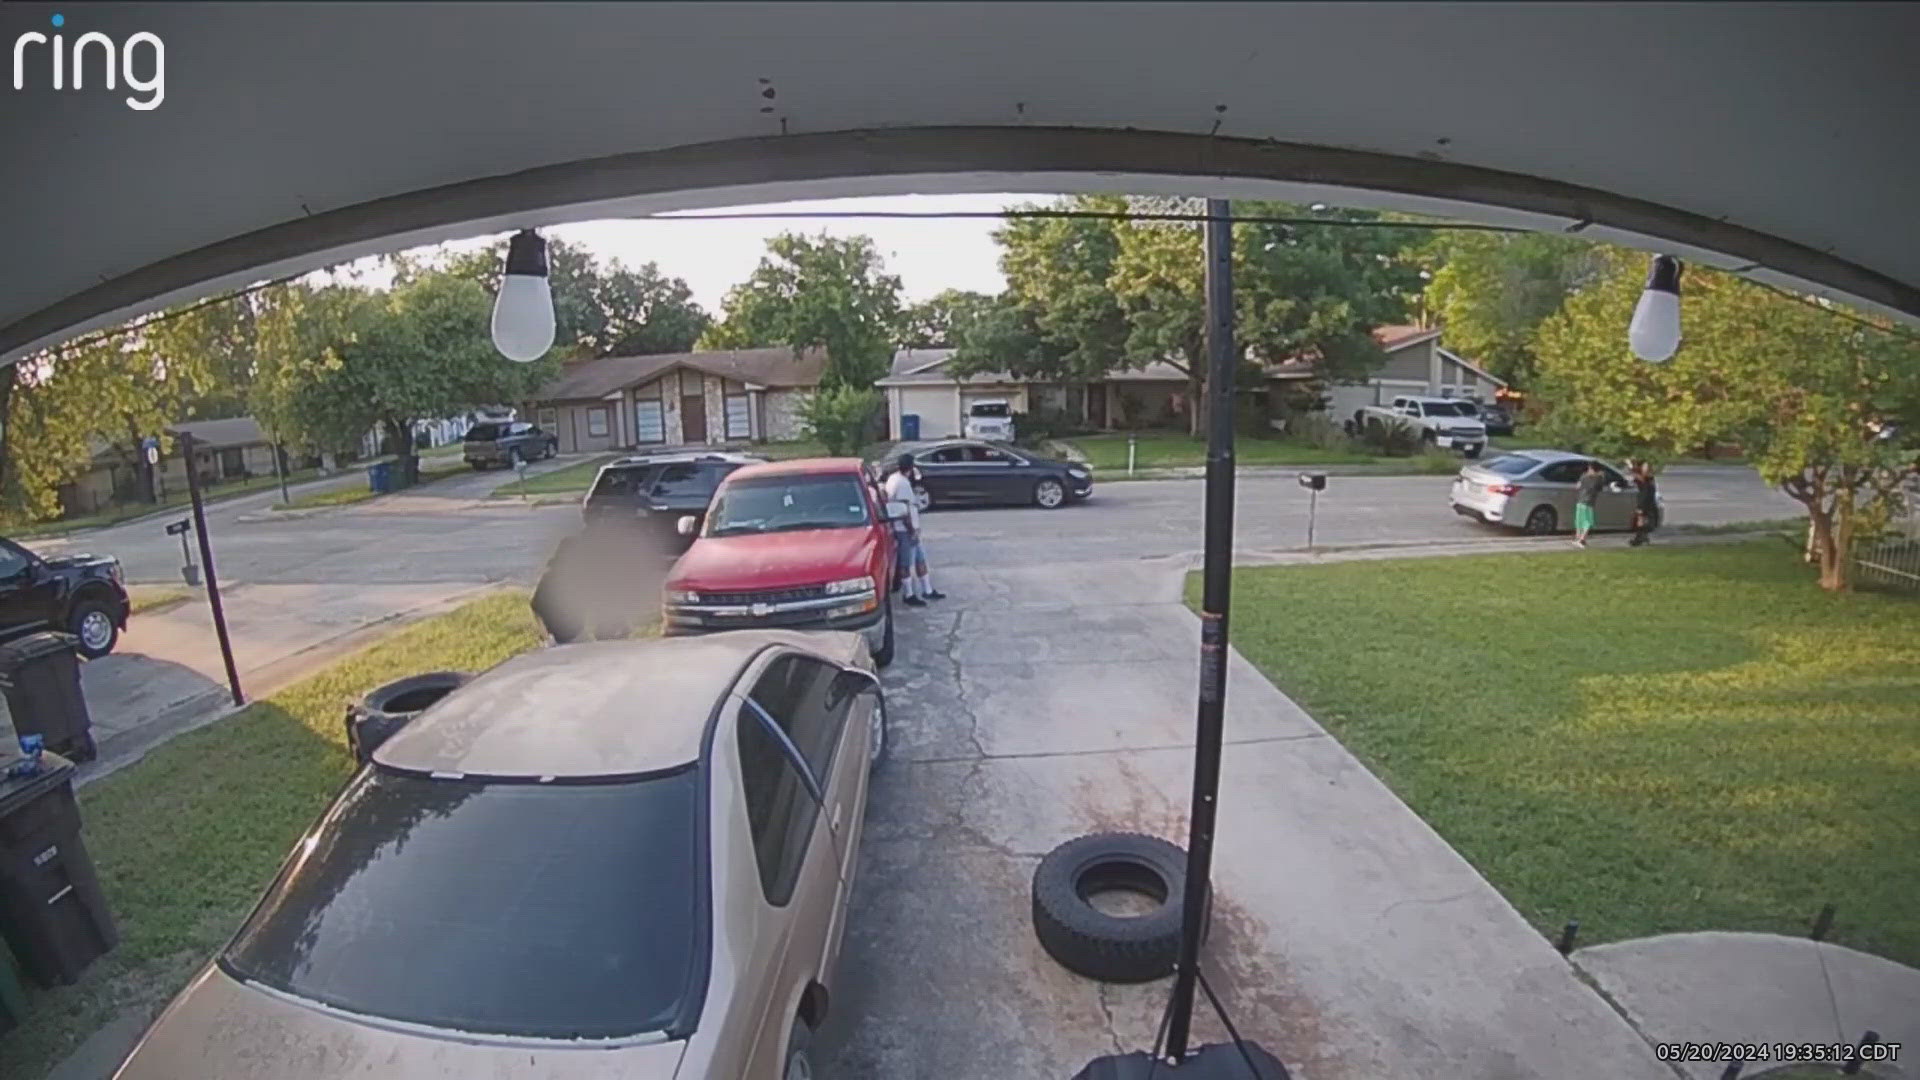 RIng camera footage captured the moment a black car drives by shooting the Orbeez guns at residents.